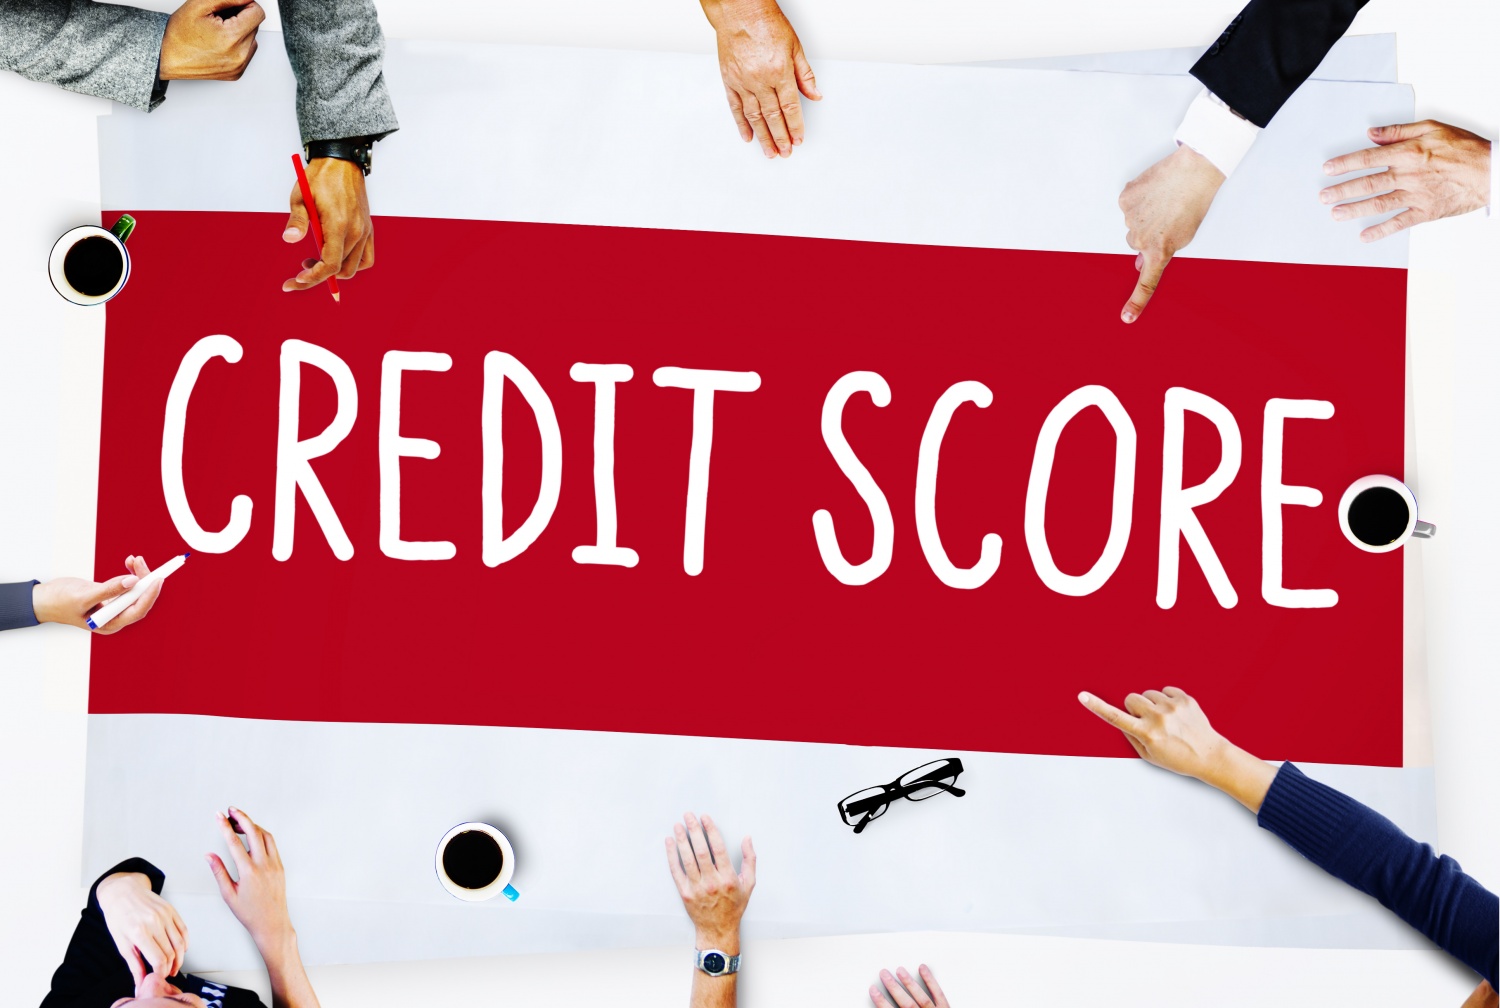 How To Increase Your Credit Score